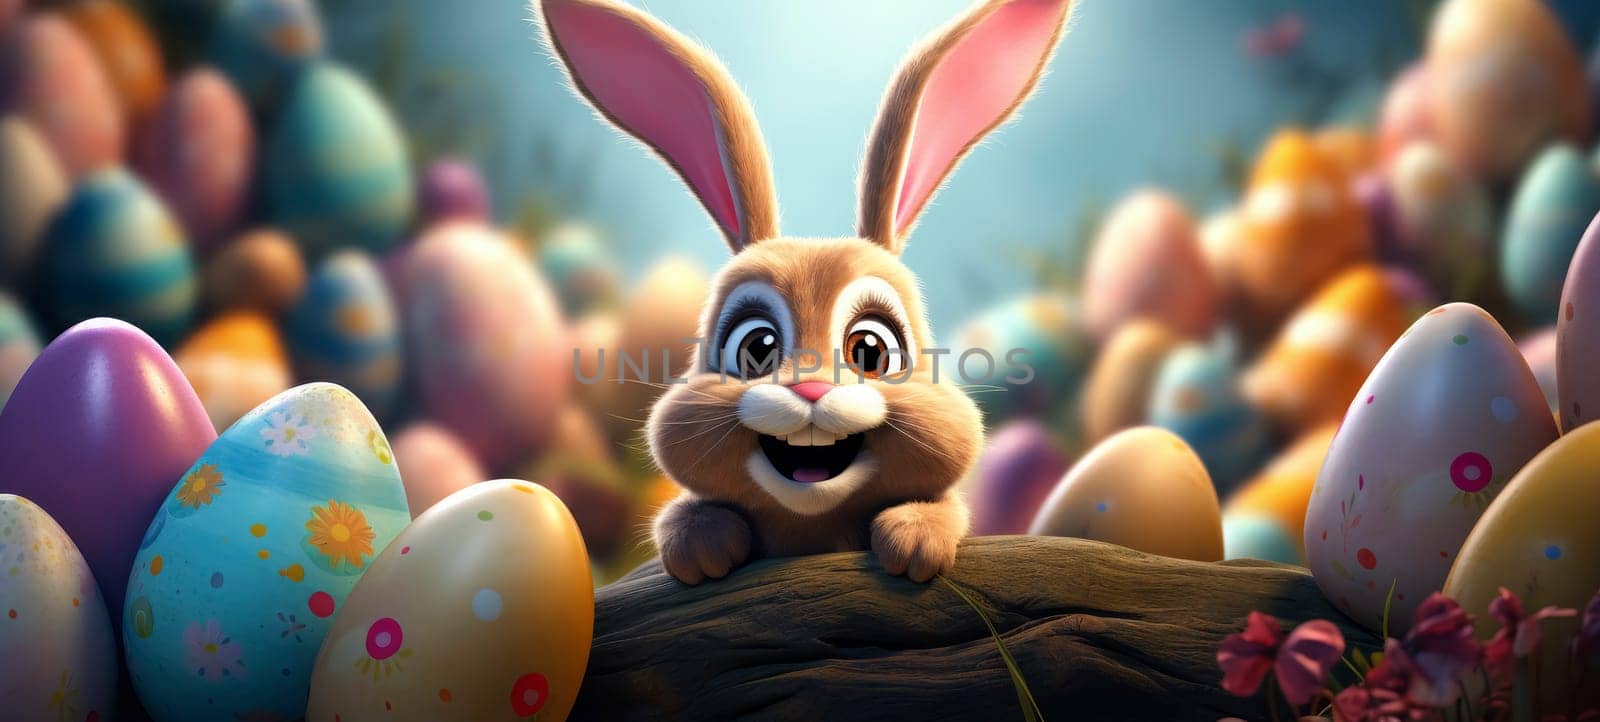 Animated rabbit peeking over log with colorful Easter eggs by andreyz